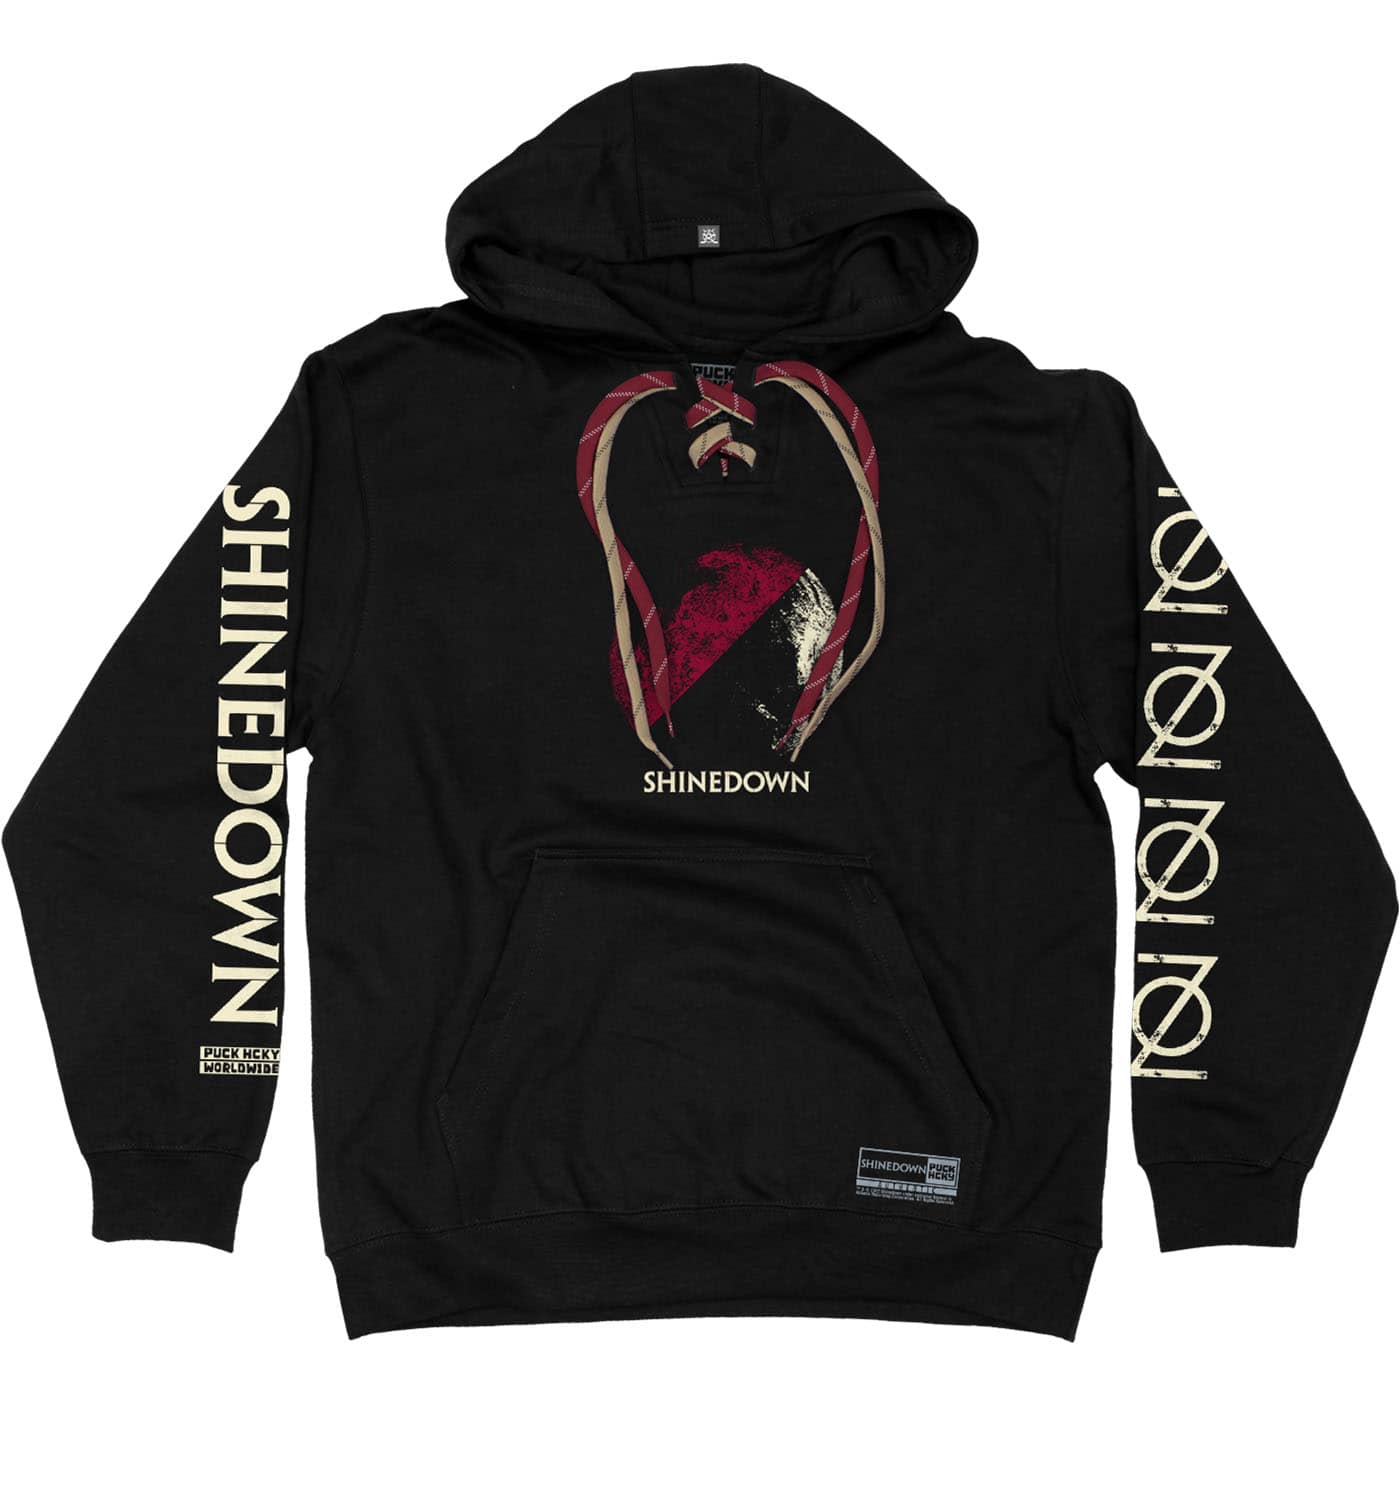 SHINEDOWN ‘PLANET ZERO' laced pullover hockey hoodie in black with red and tan laces front view